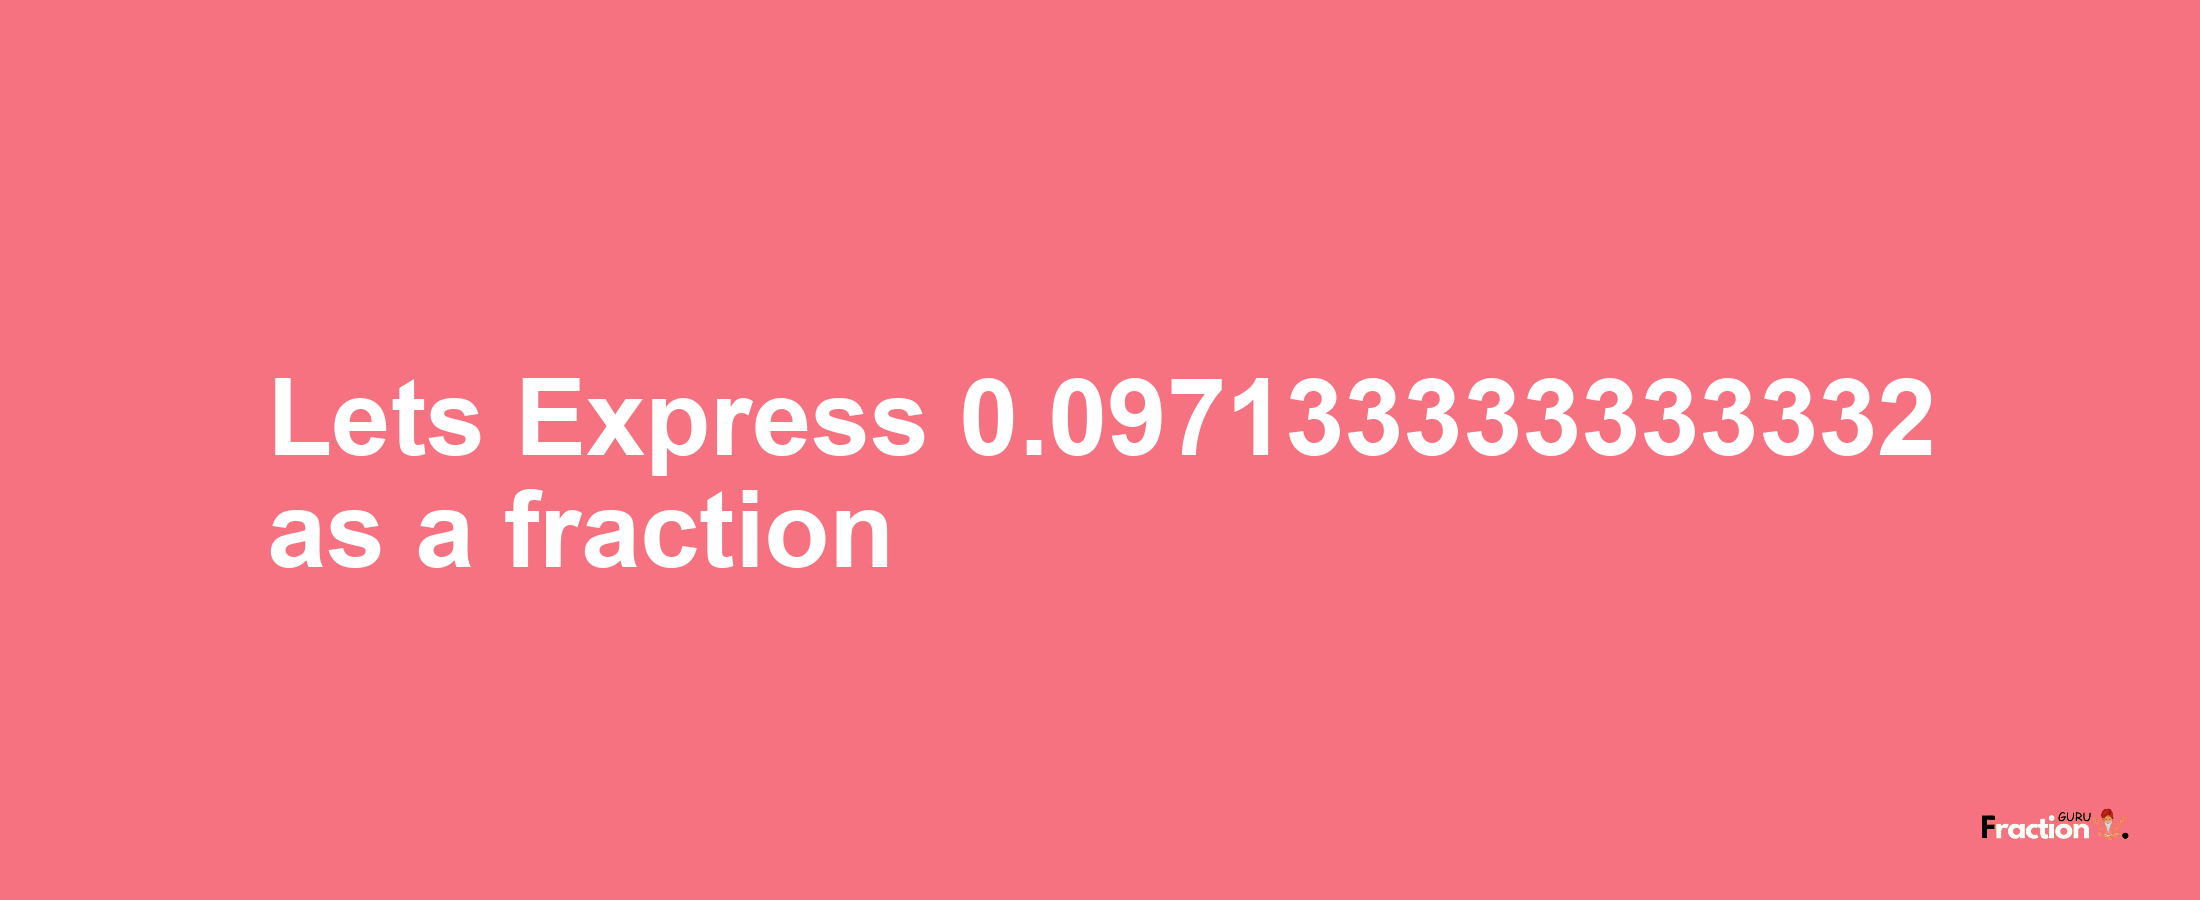 Lets Express 0.097133333333332 as afraction